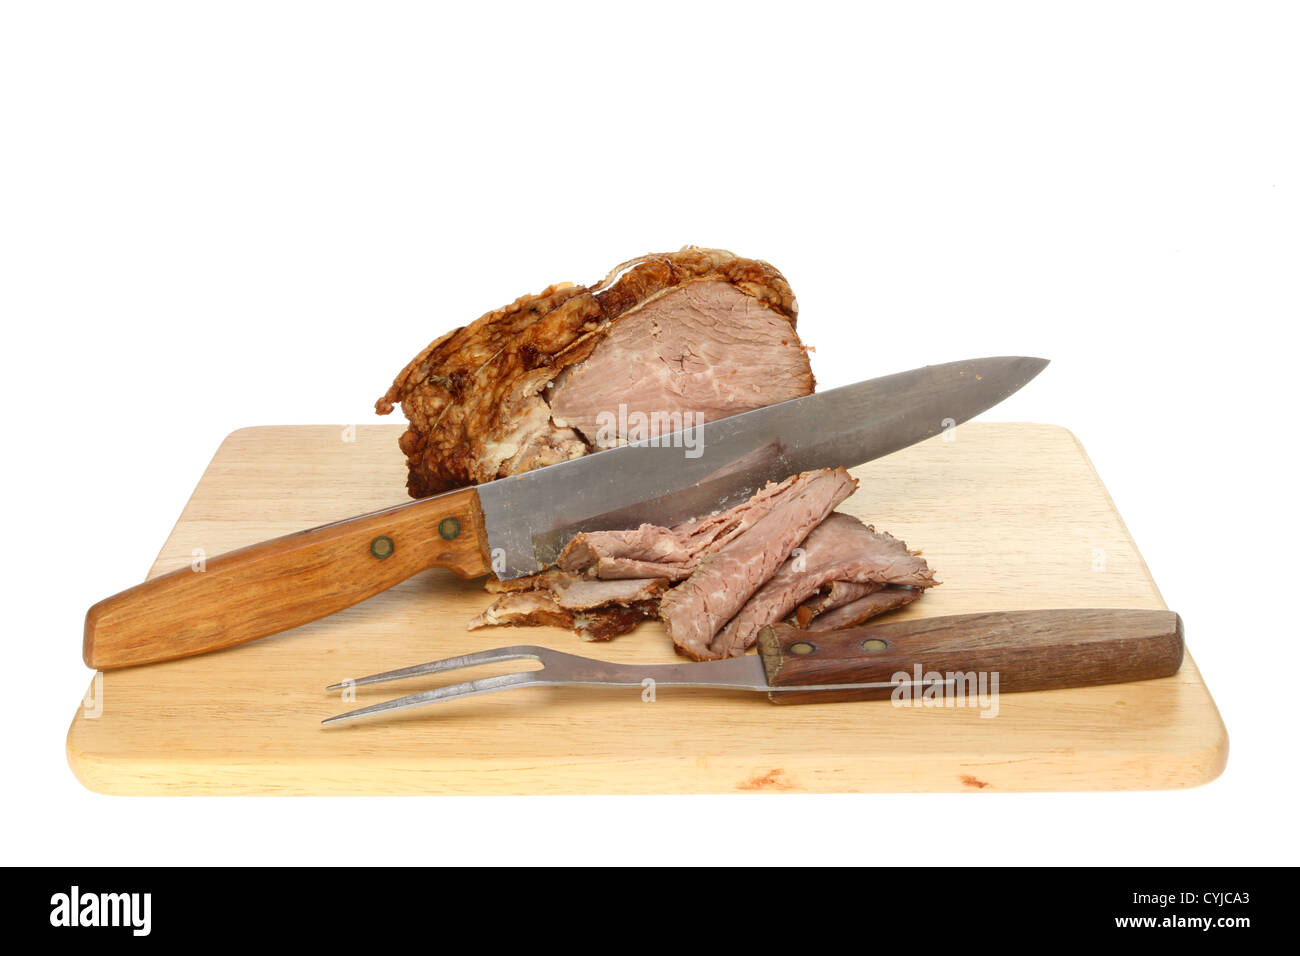 Roast beef with a carving knife and fork on a wooden board isolated against white Stock Photo